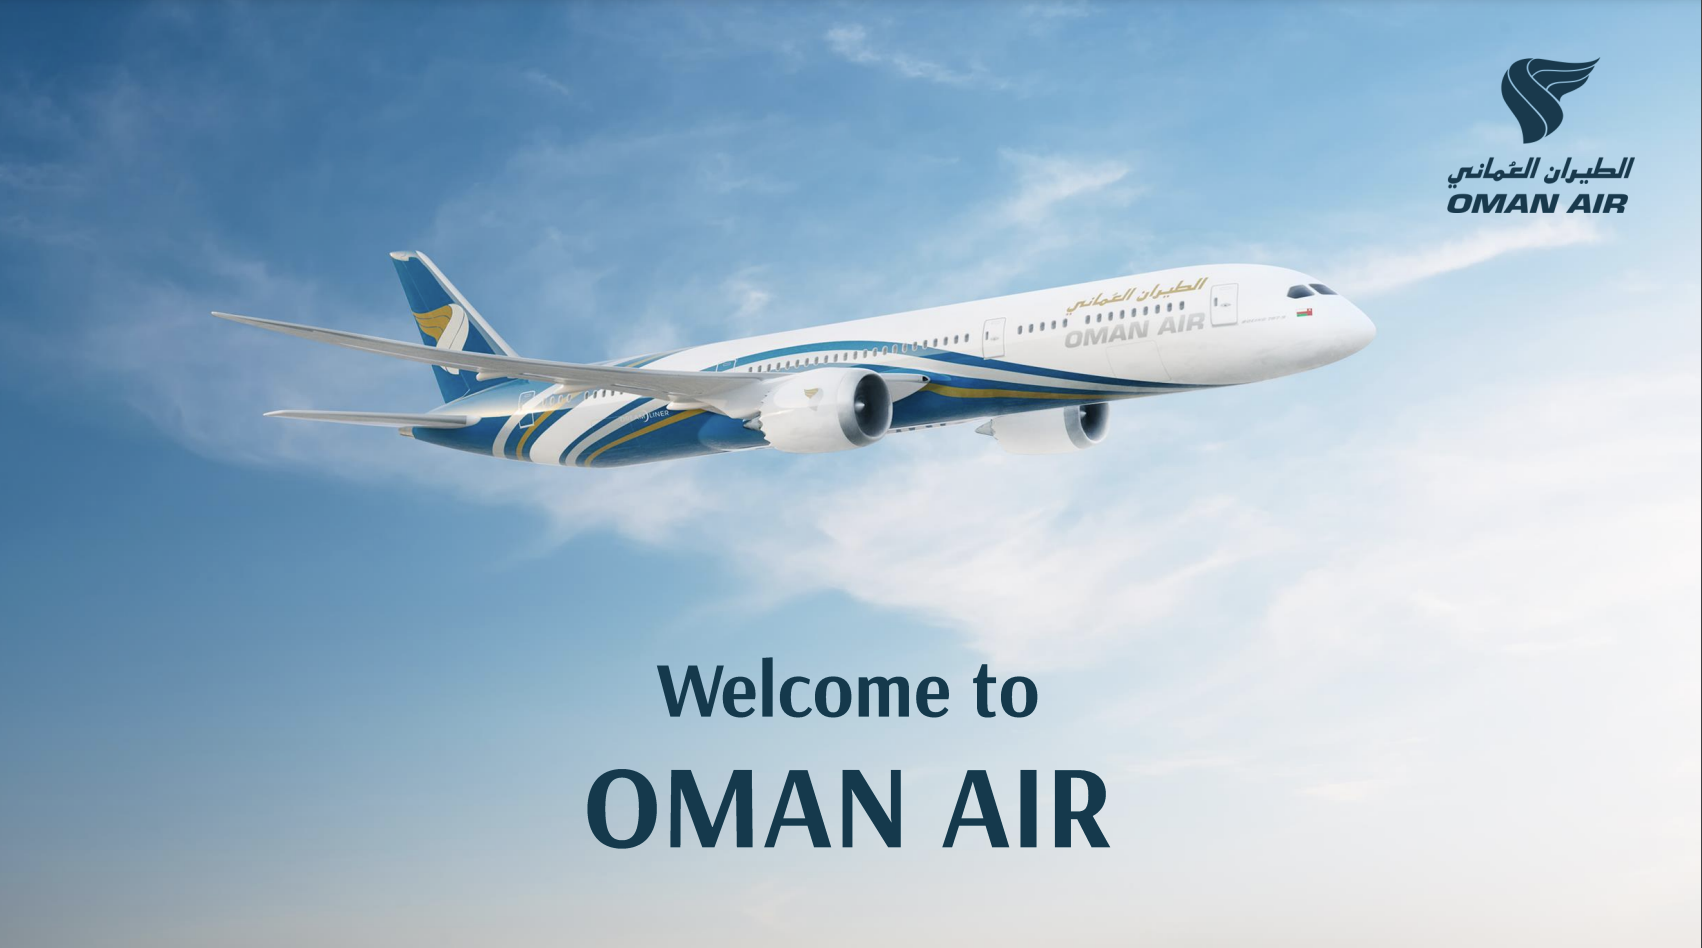 Fly with Oman Air